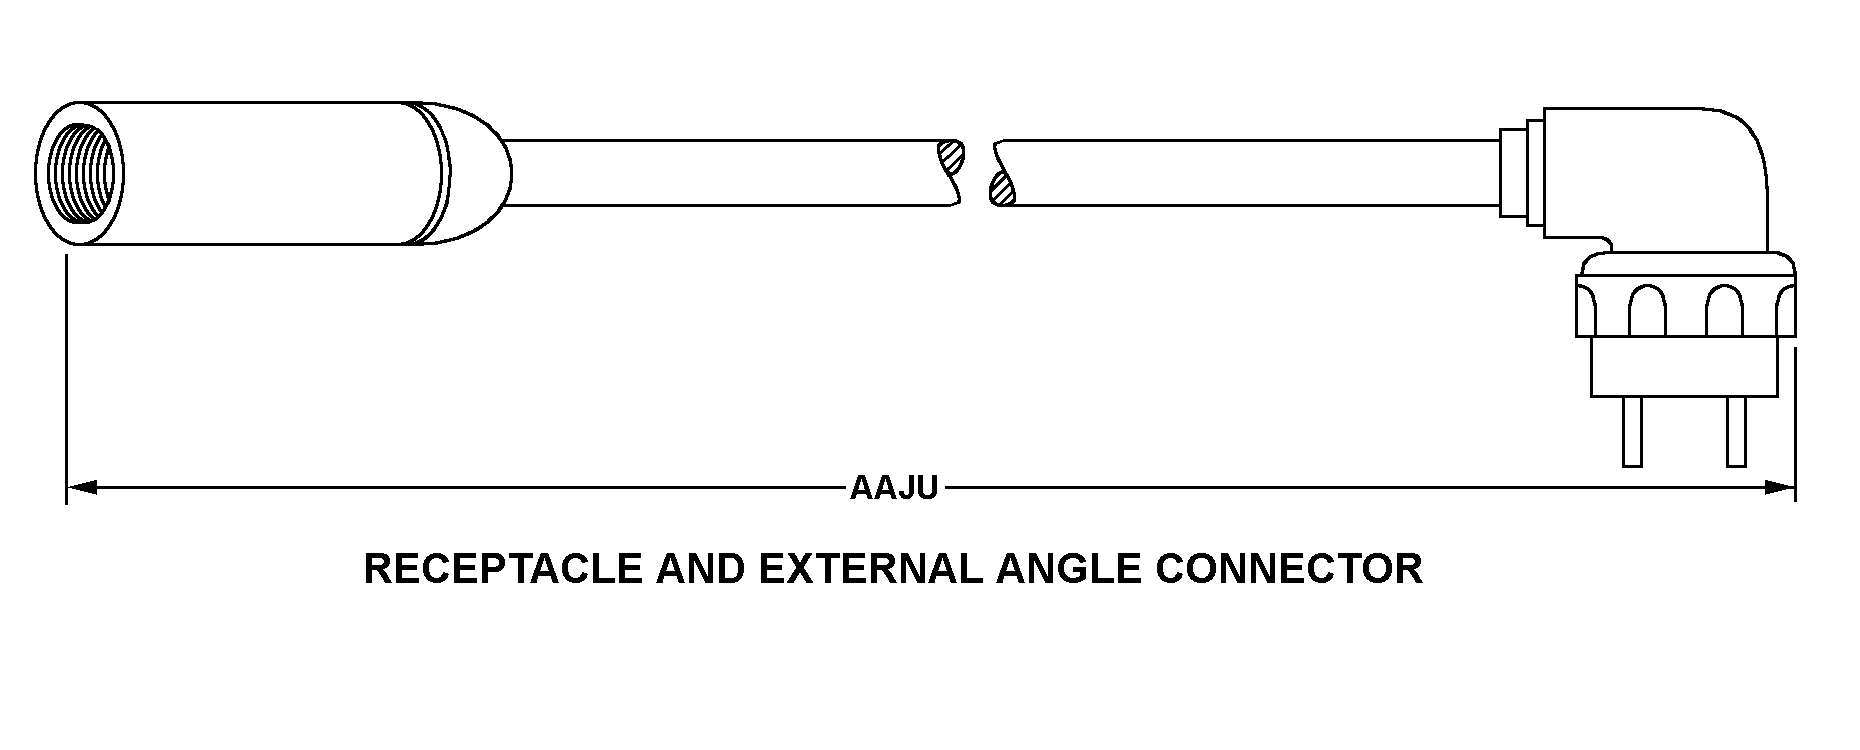 RECEPTACLE AND EXTERNAL ANGLE CONNECTOR style nsn 6150-01-005-7289